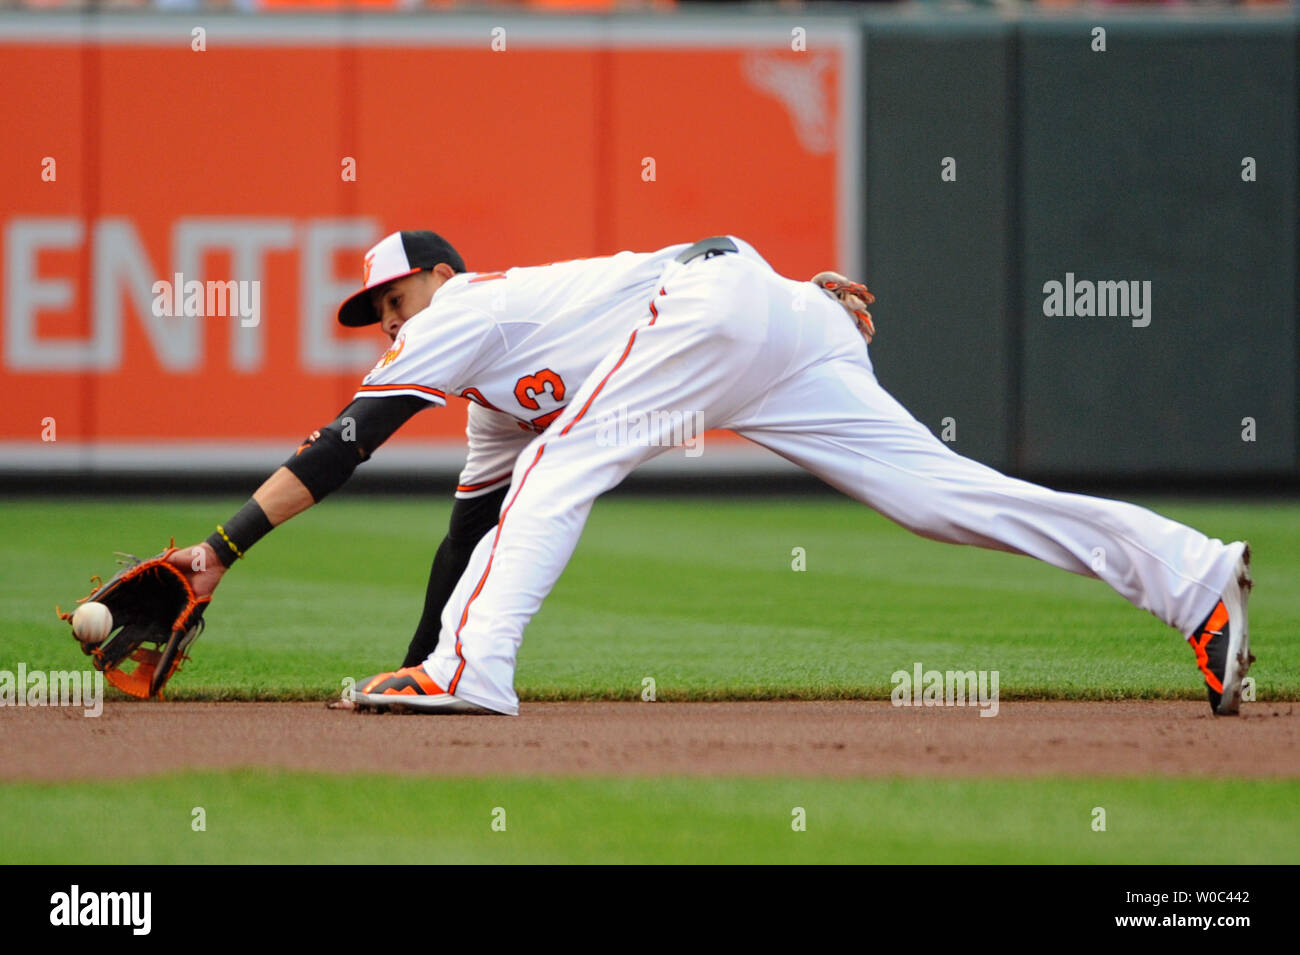 Baltimore Orioles third baseman Manny Machado (13) makes a diving stop on a  ground ball against the Boston Red Sox in the first inning at Orioles Park  at Camden Yards in Baltimore